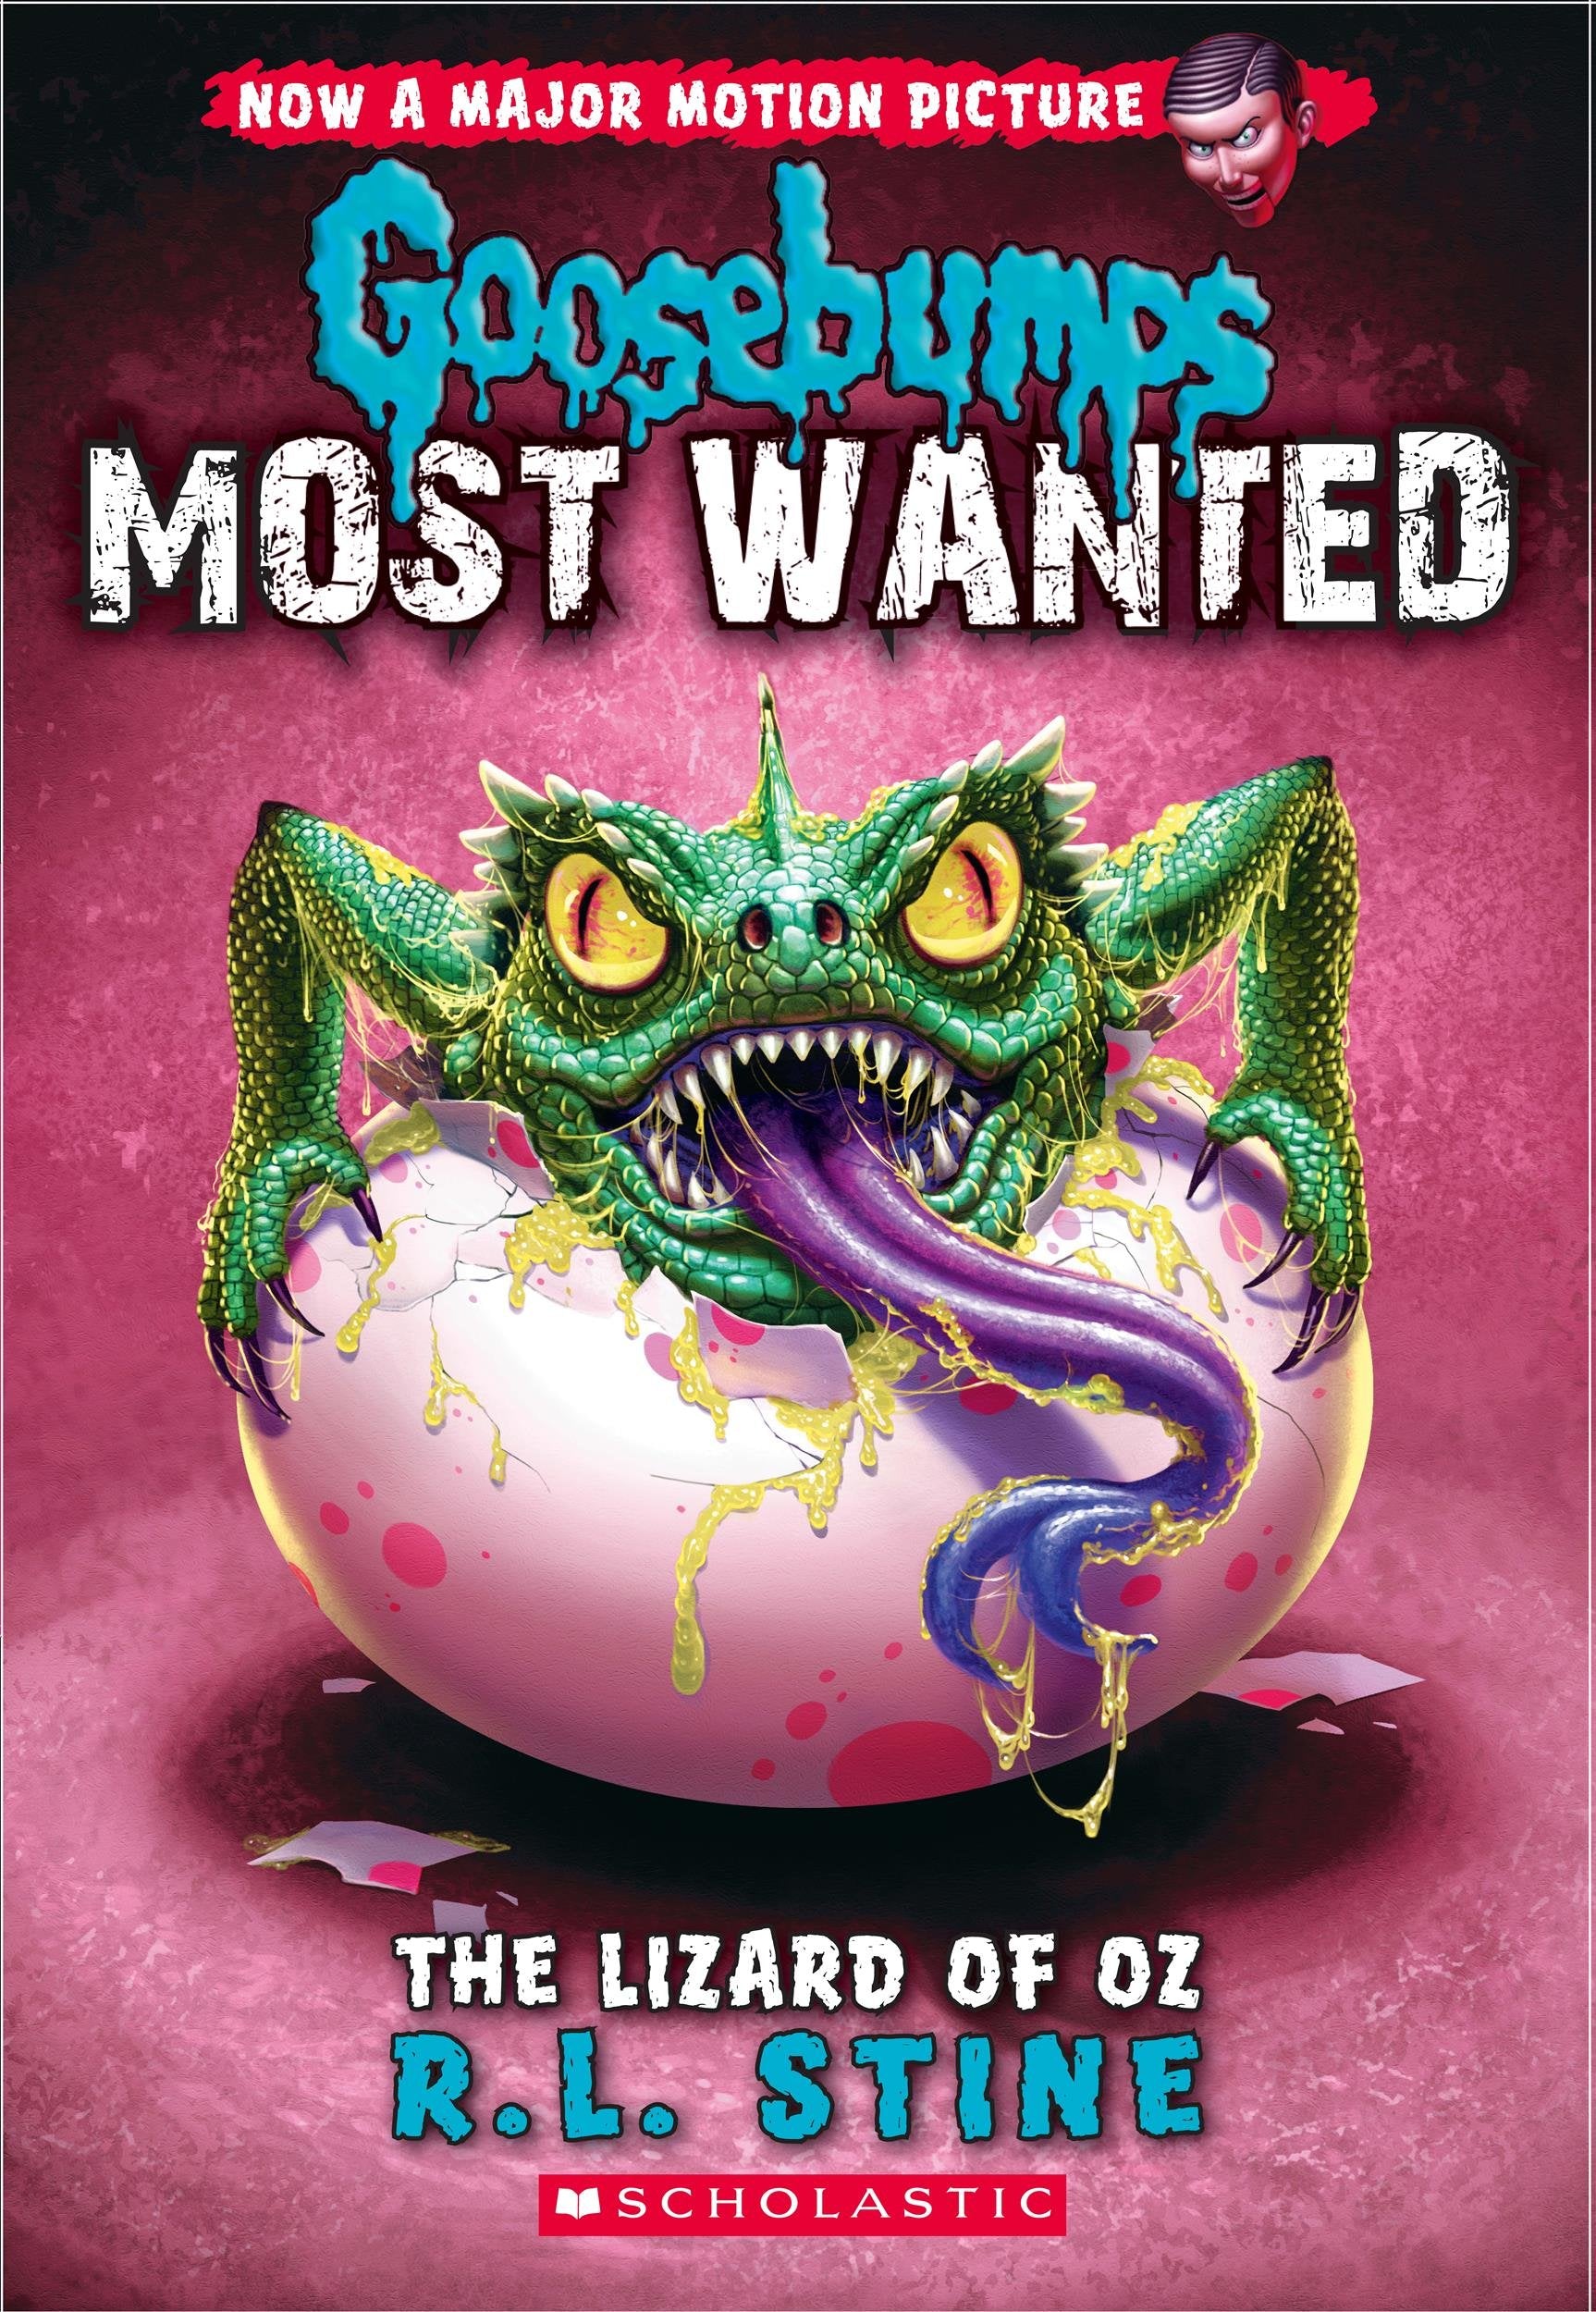 Goosbumps Most Wanted #10: The Lizard of Oz